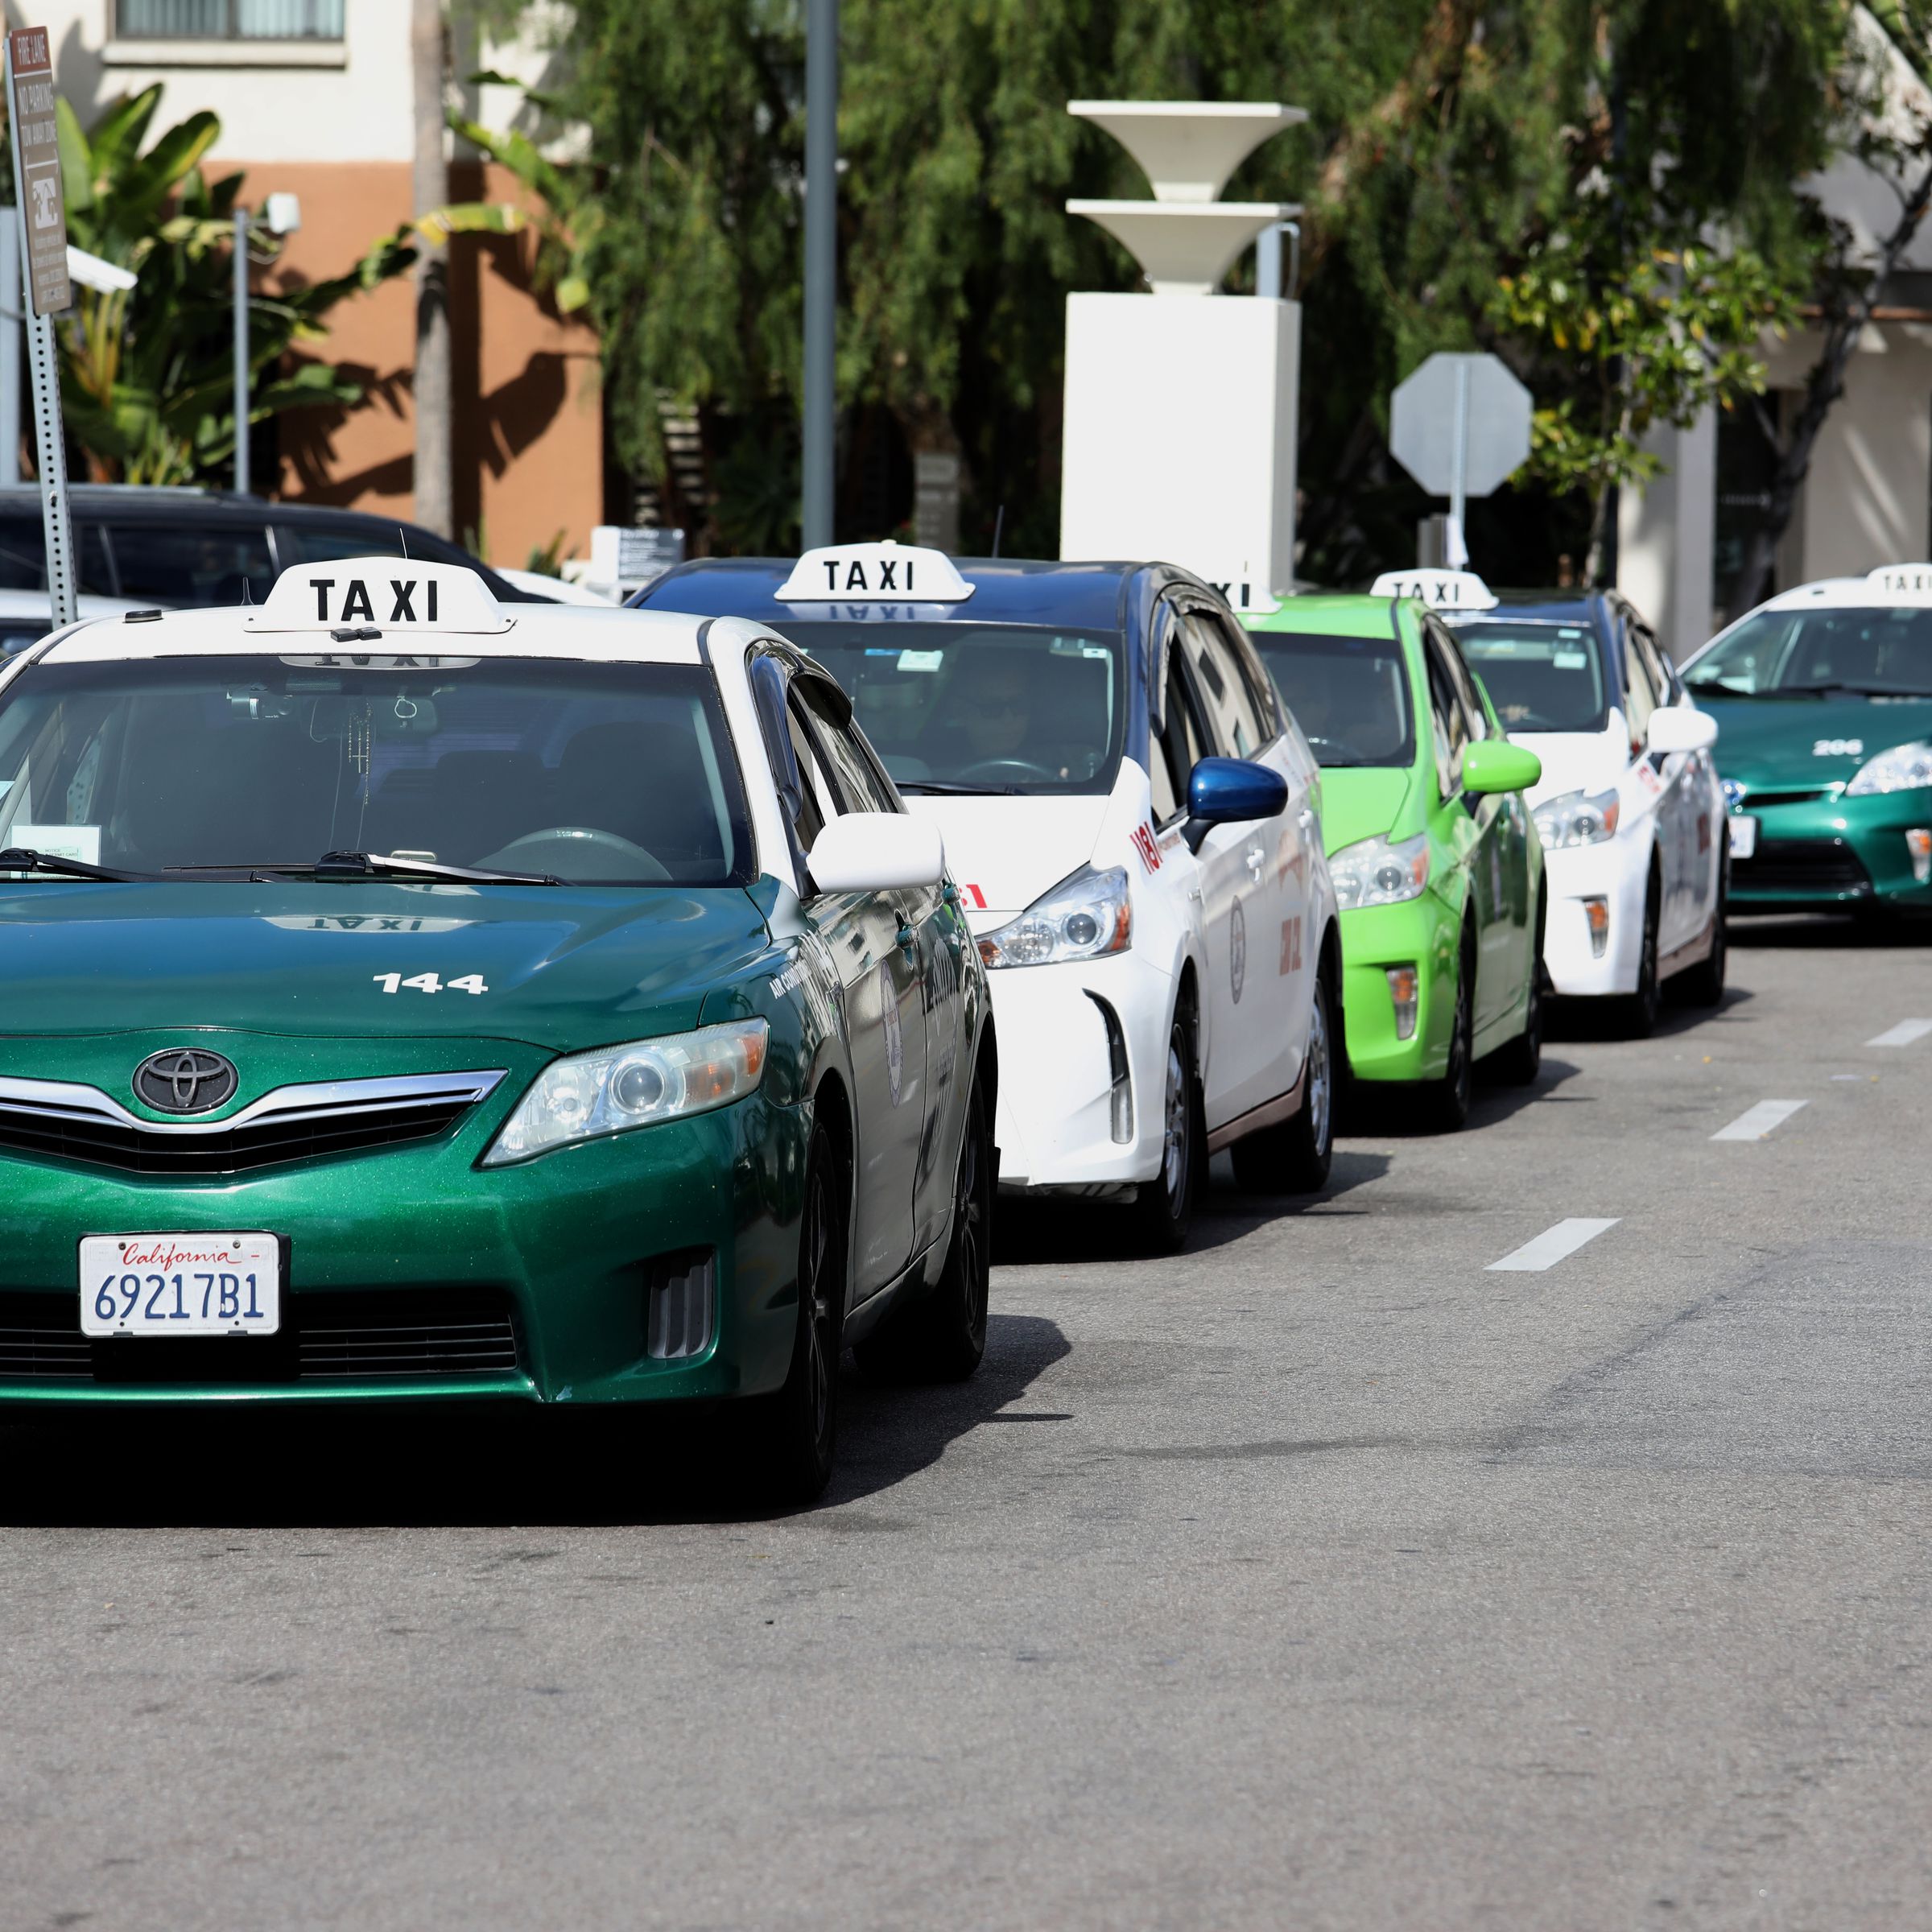 The Los Angeles City Council is expected to vote Tuesday to overhaul a decades-old taxi permitting system and introduce ridehailing apps to compete with Uber and Lyft